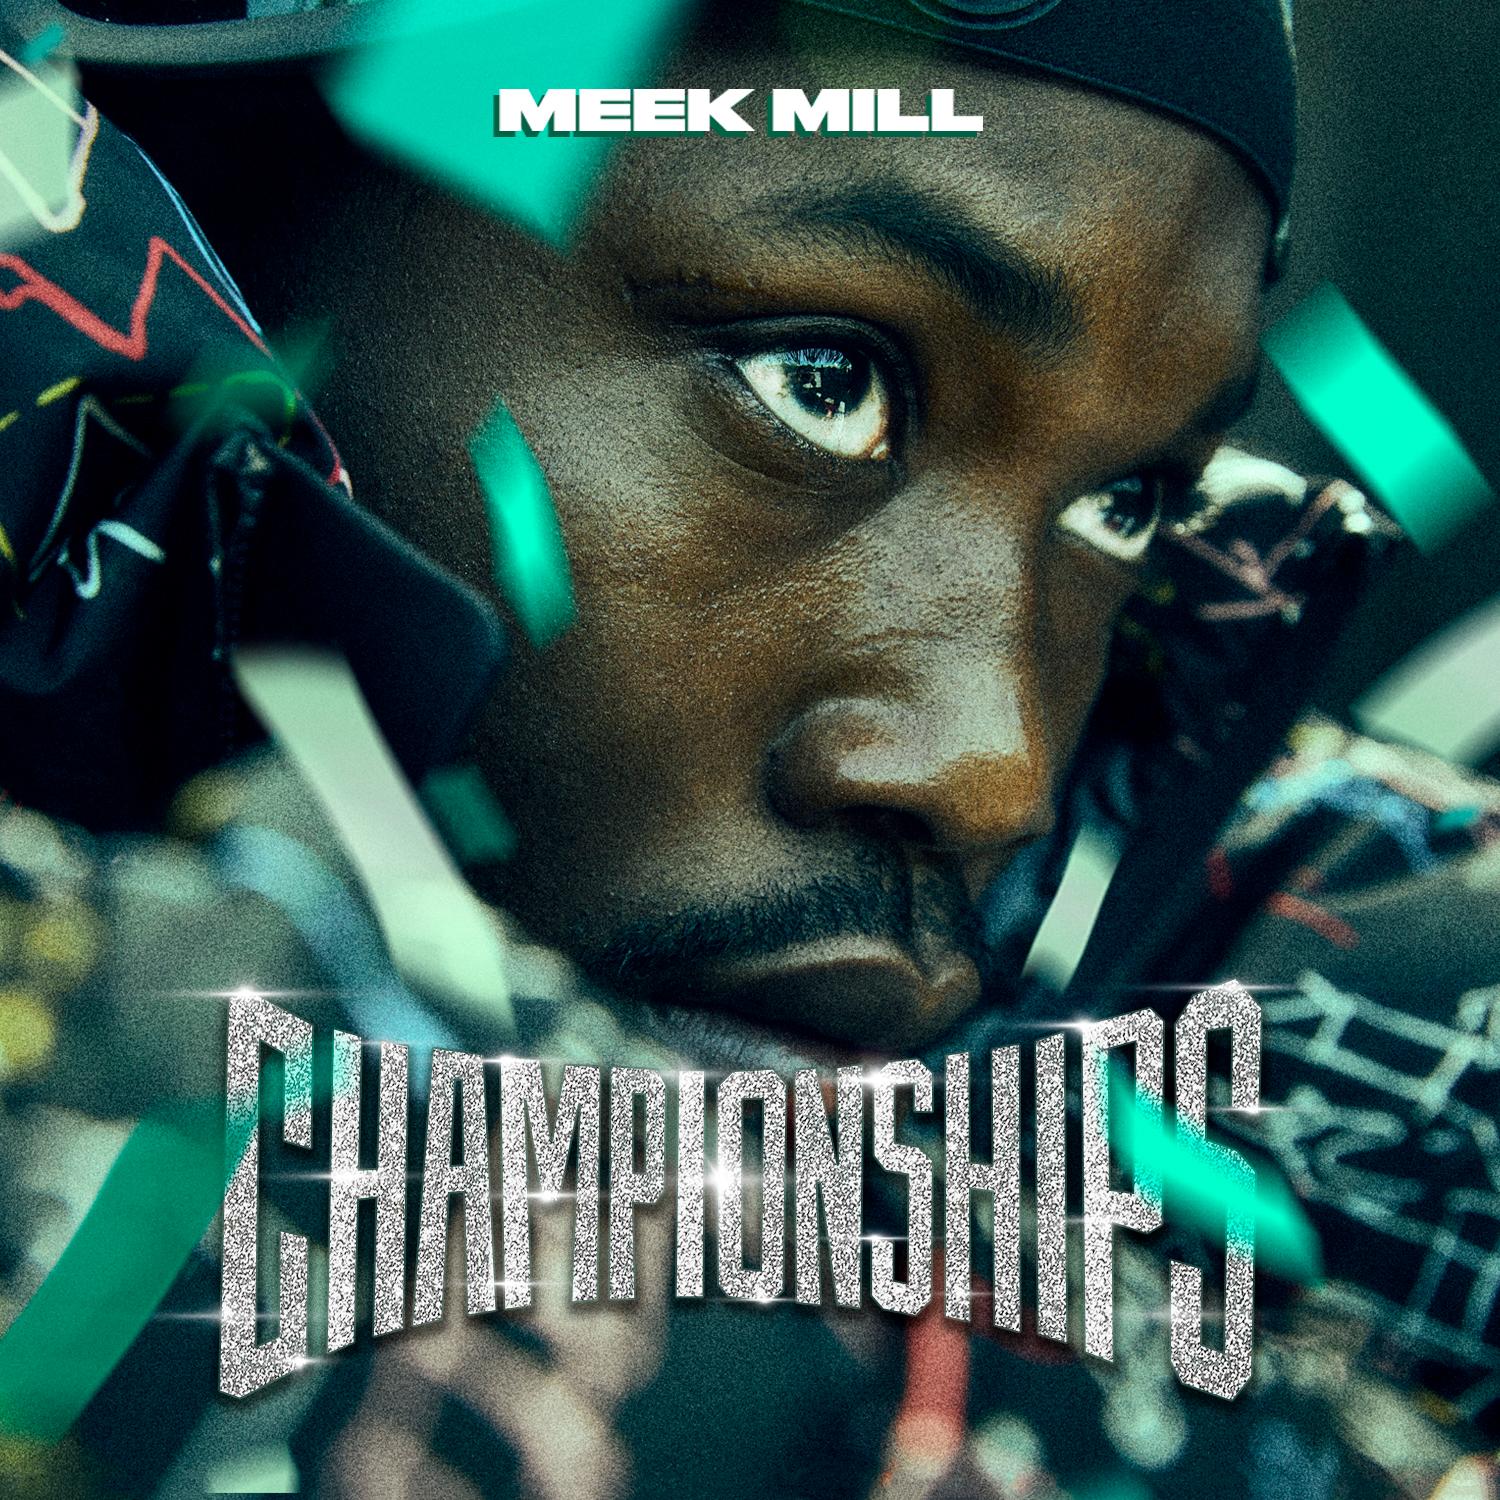 Making a Beat: Meek Mill – Going Bad feat. Drake